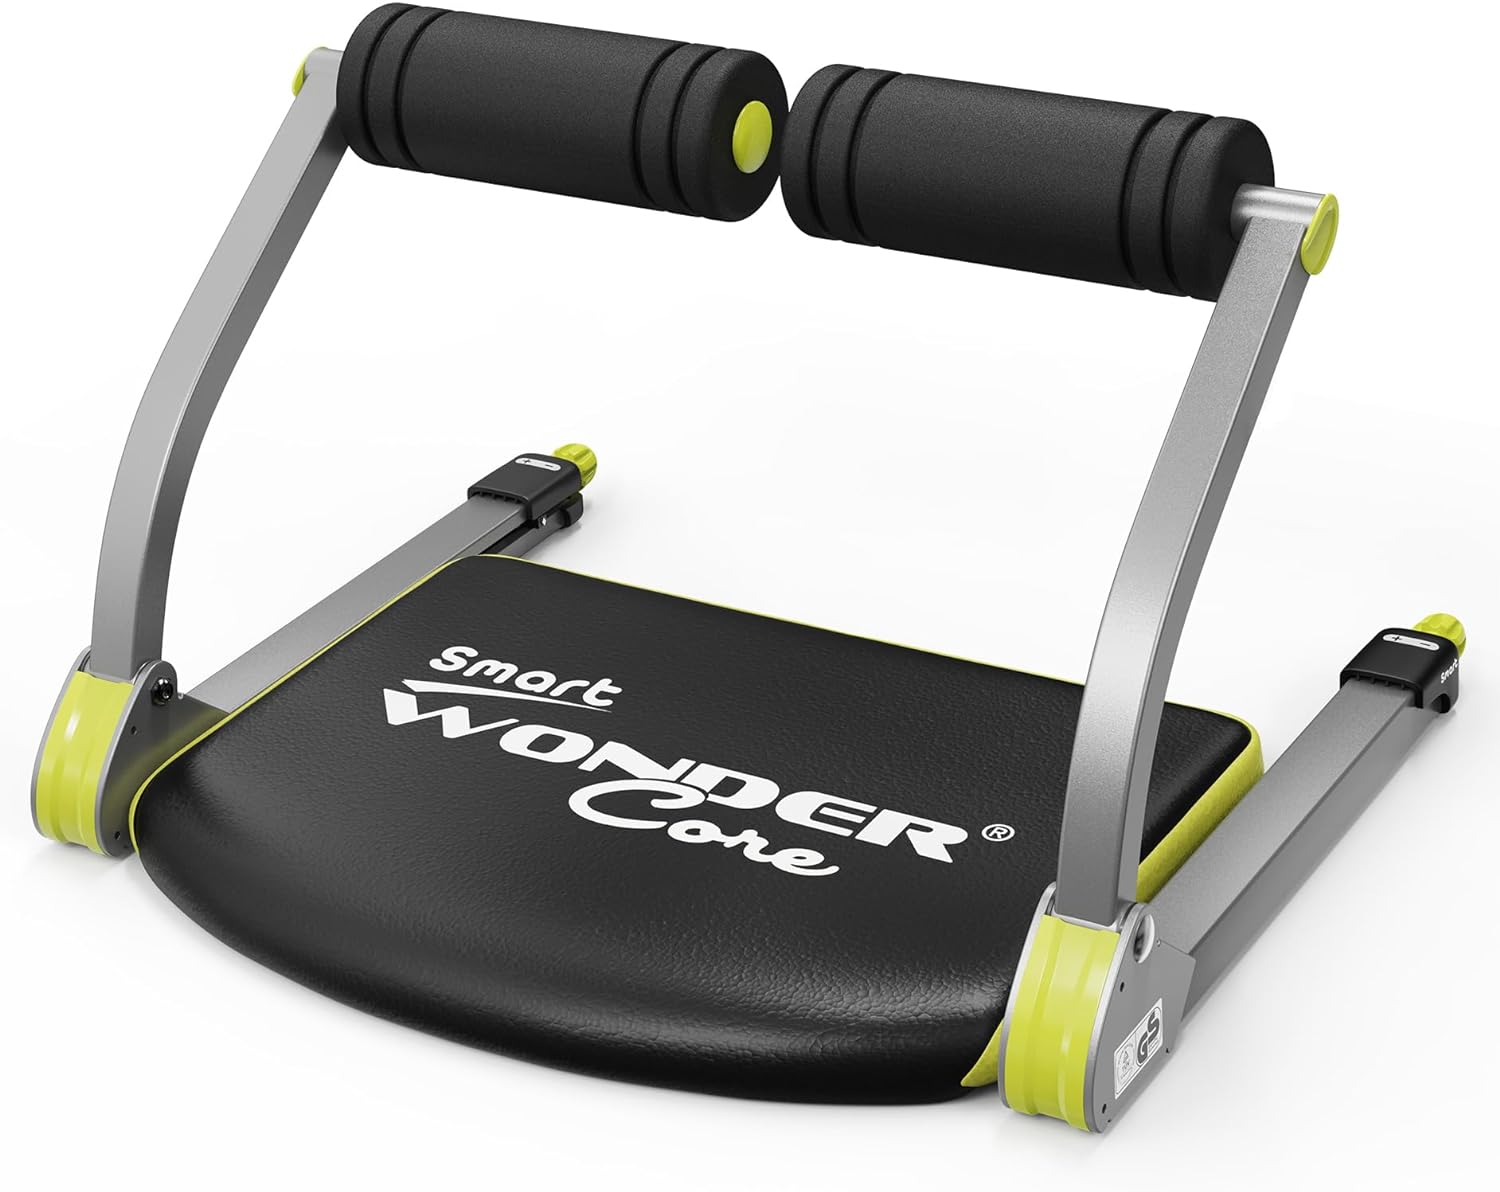 You are currently viewing WONDER CORE SMART Sit Up Exercise Equipment, Abdominal Exercise Machine for Home